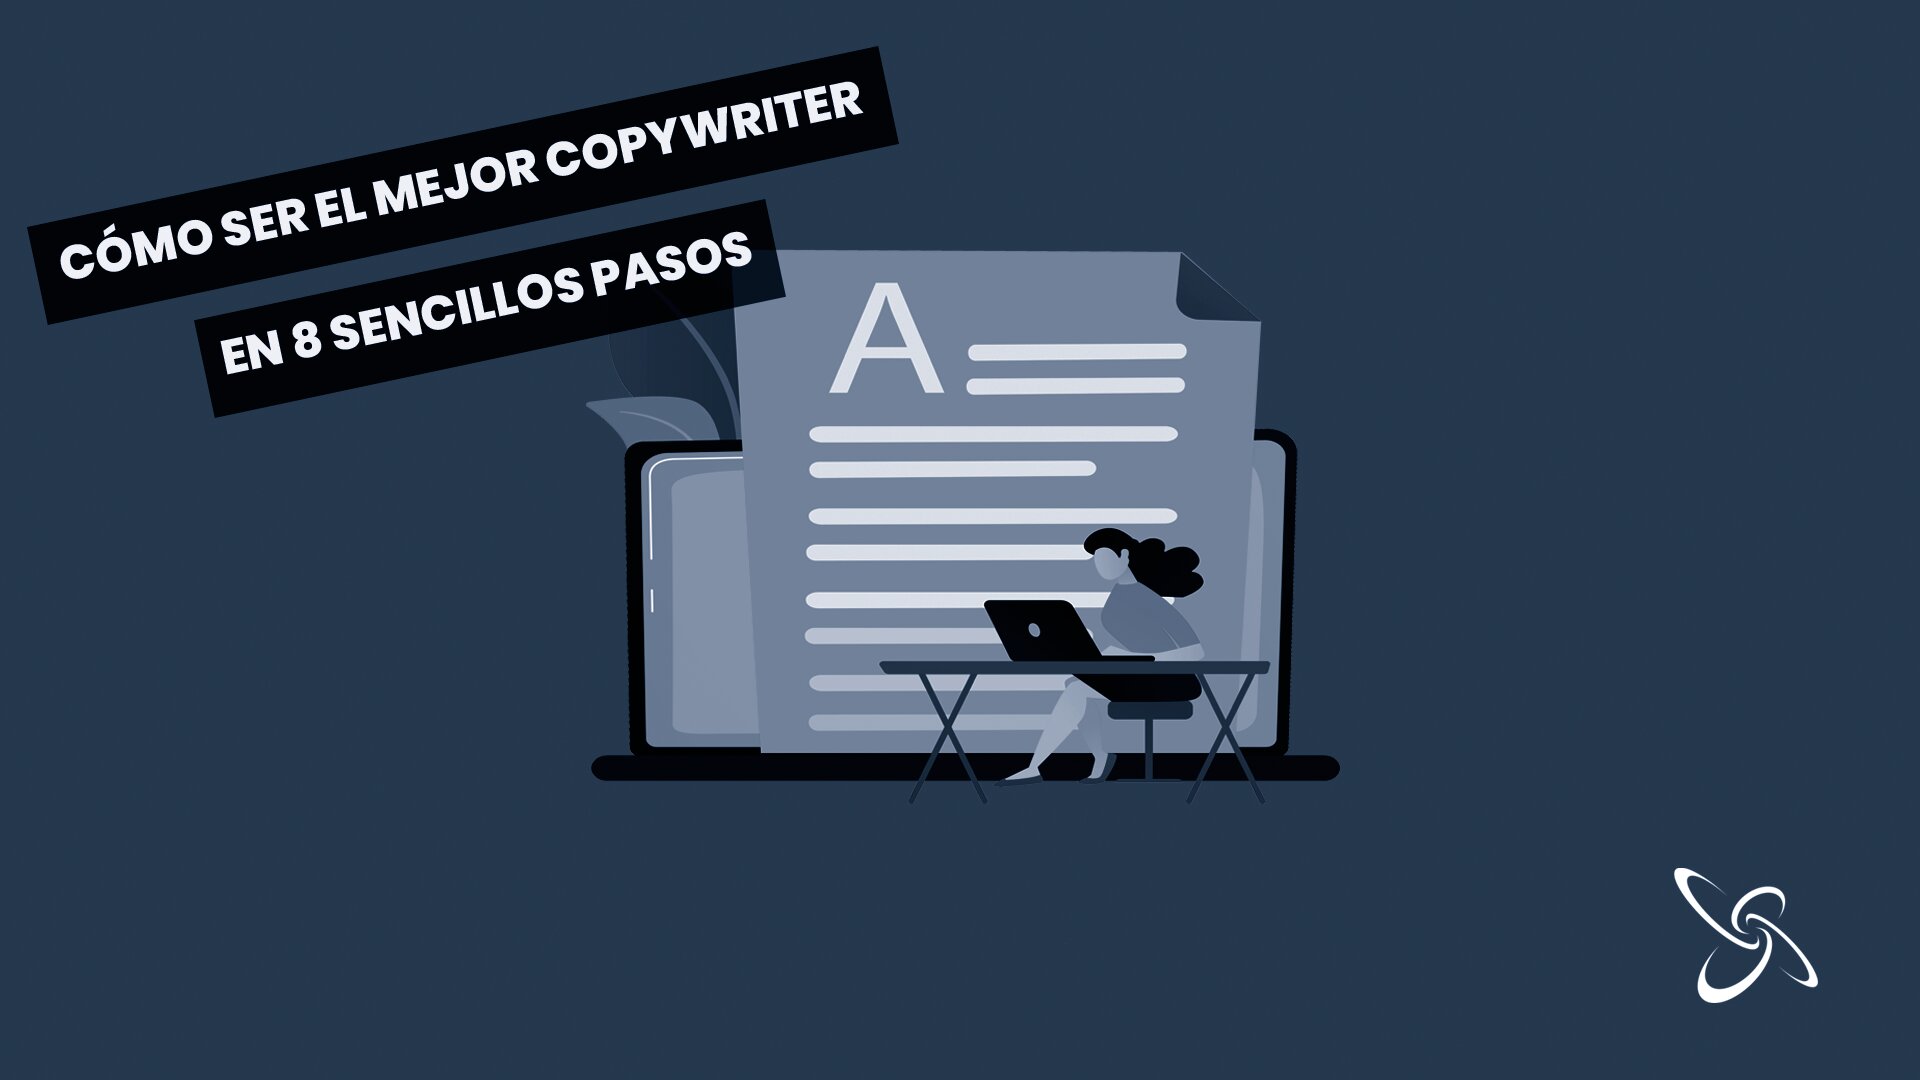 How to be the best copywriter in 8 simple steps